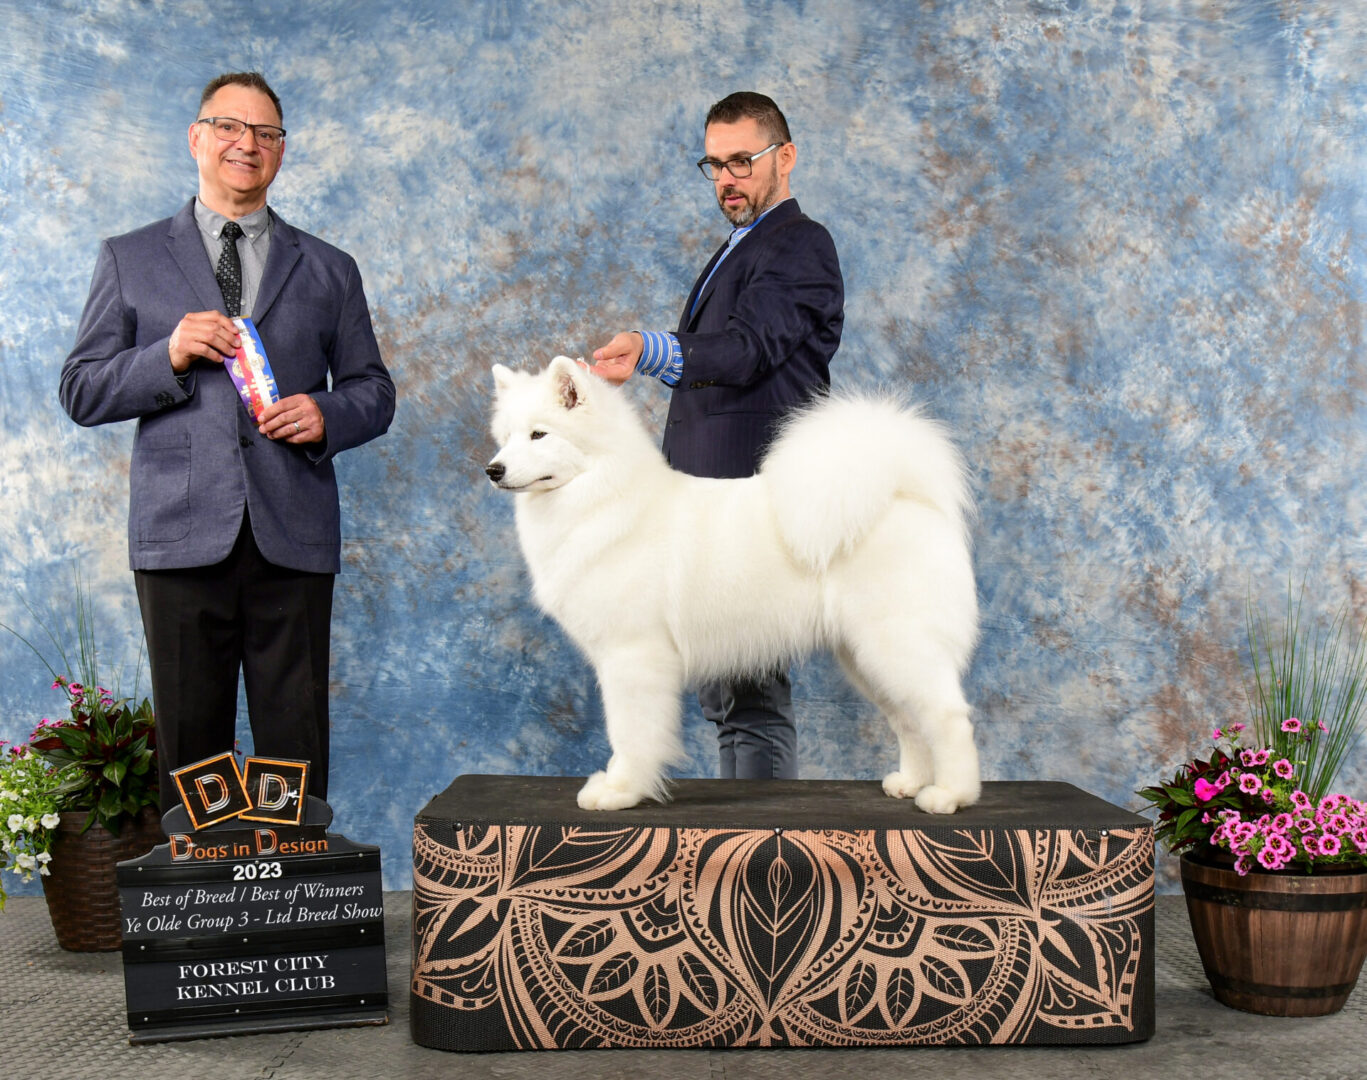 Two men standing next to a white dog on top of a podium.